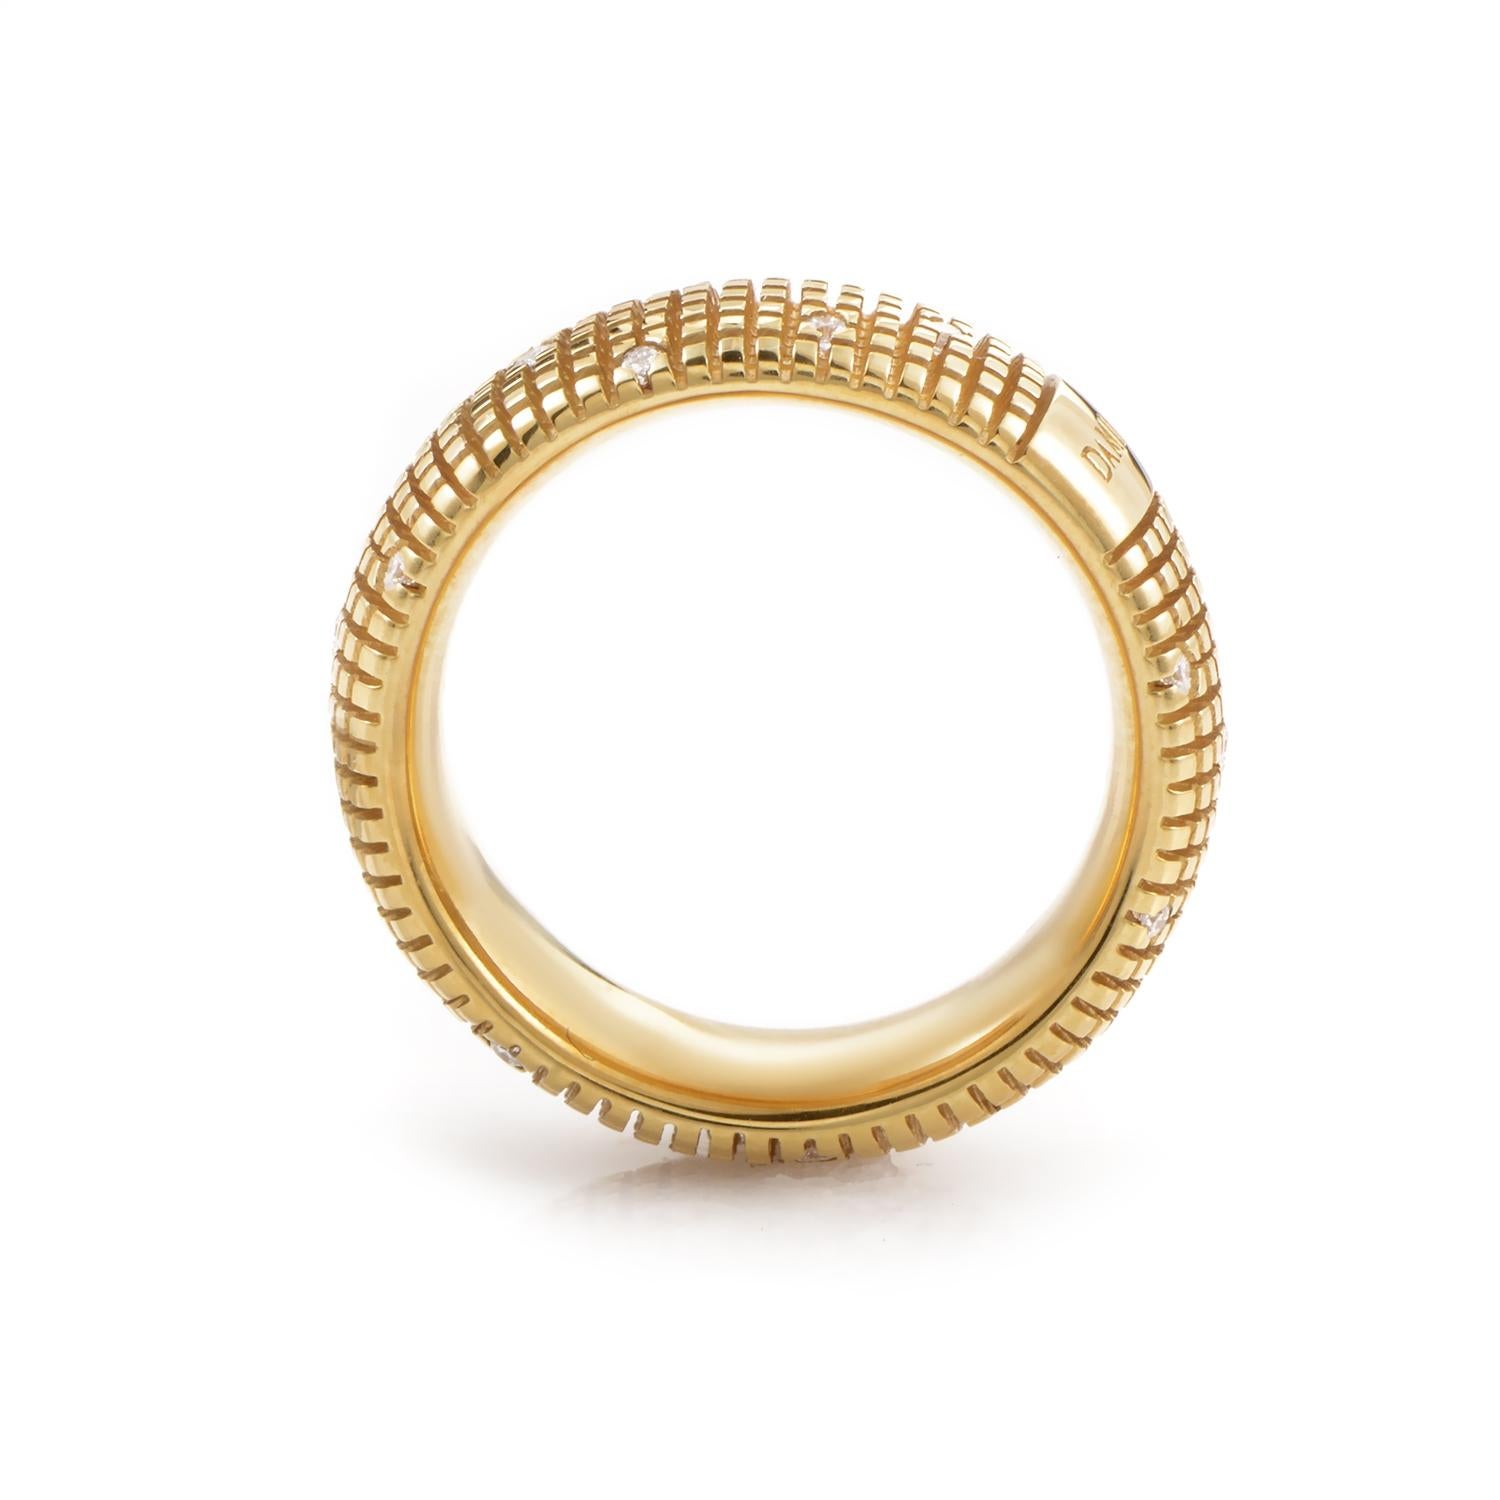 This band ring from Damiani has a fairly simple design that is still very distinguished. The ring is made of textured 18K yellow gold and is set with ~.14ct of diamonds.
